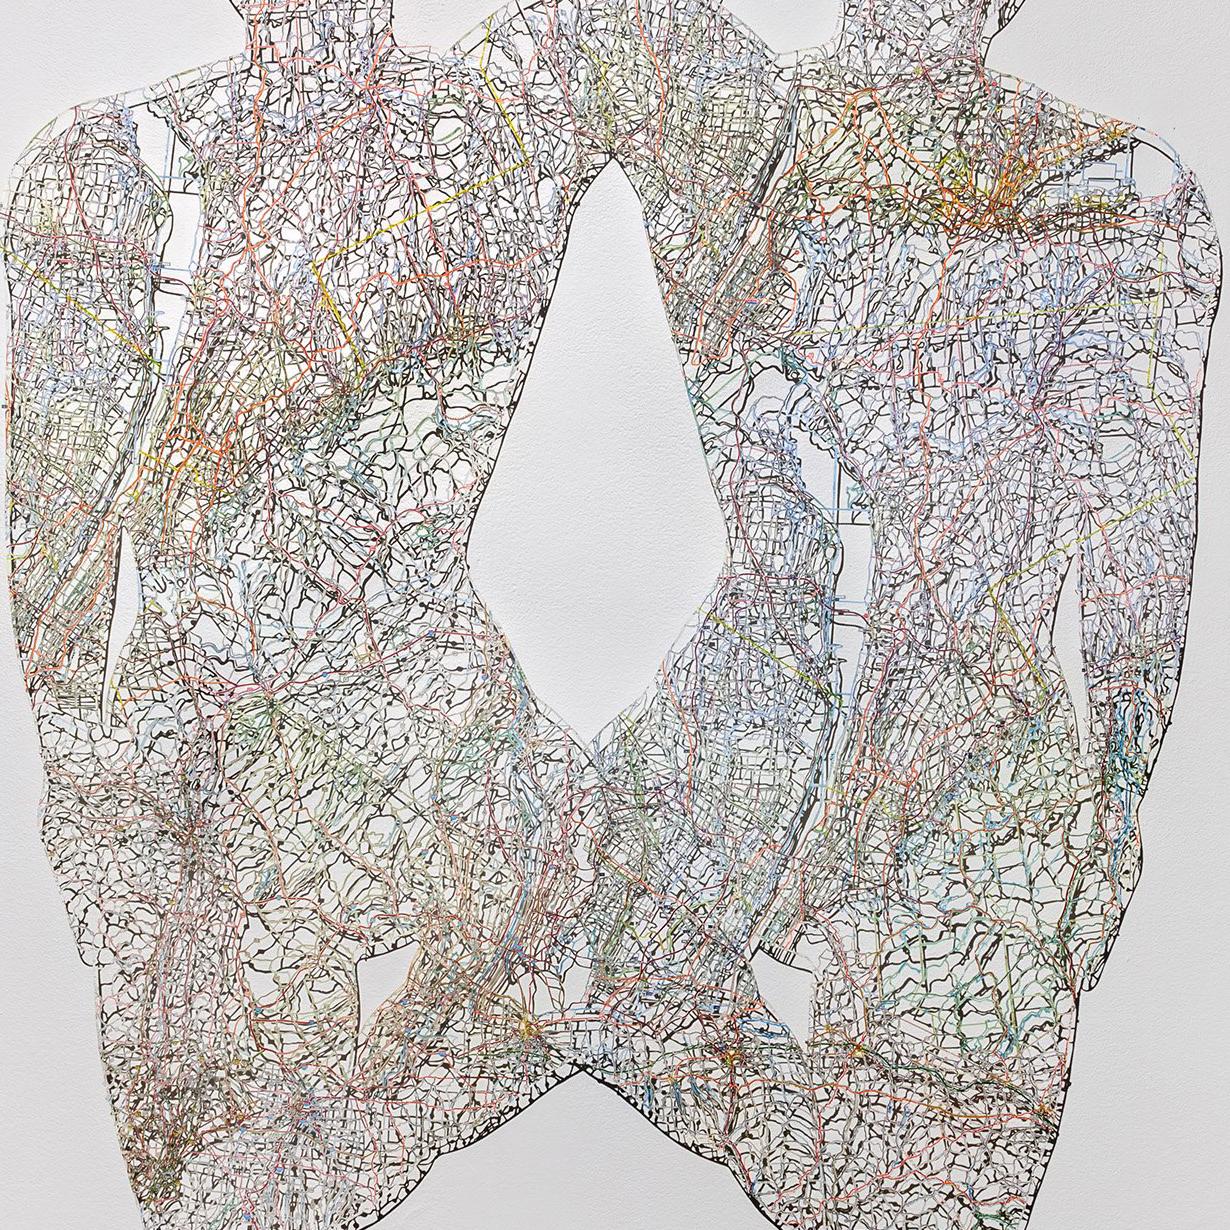 medium: hand cut road map

Nikki Rosato earned her MFA from the School of the Museum of Fine Arts, Boston in 2013. Prior to studying at SMFA, Rosato received a Bachelor of Arts degree in Studio Art and Art History from the University of